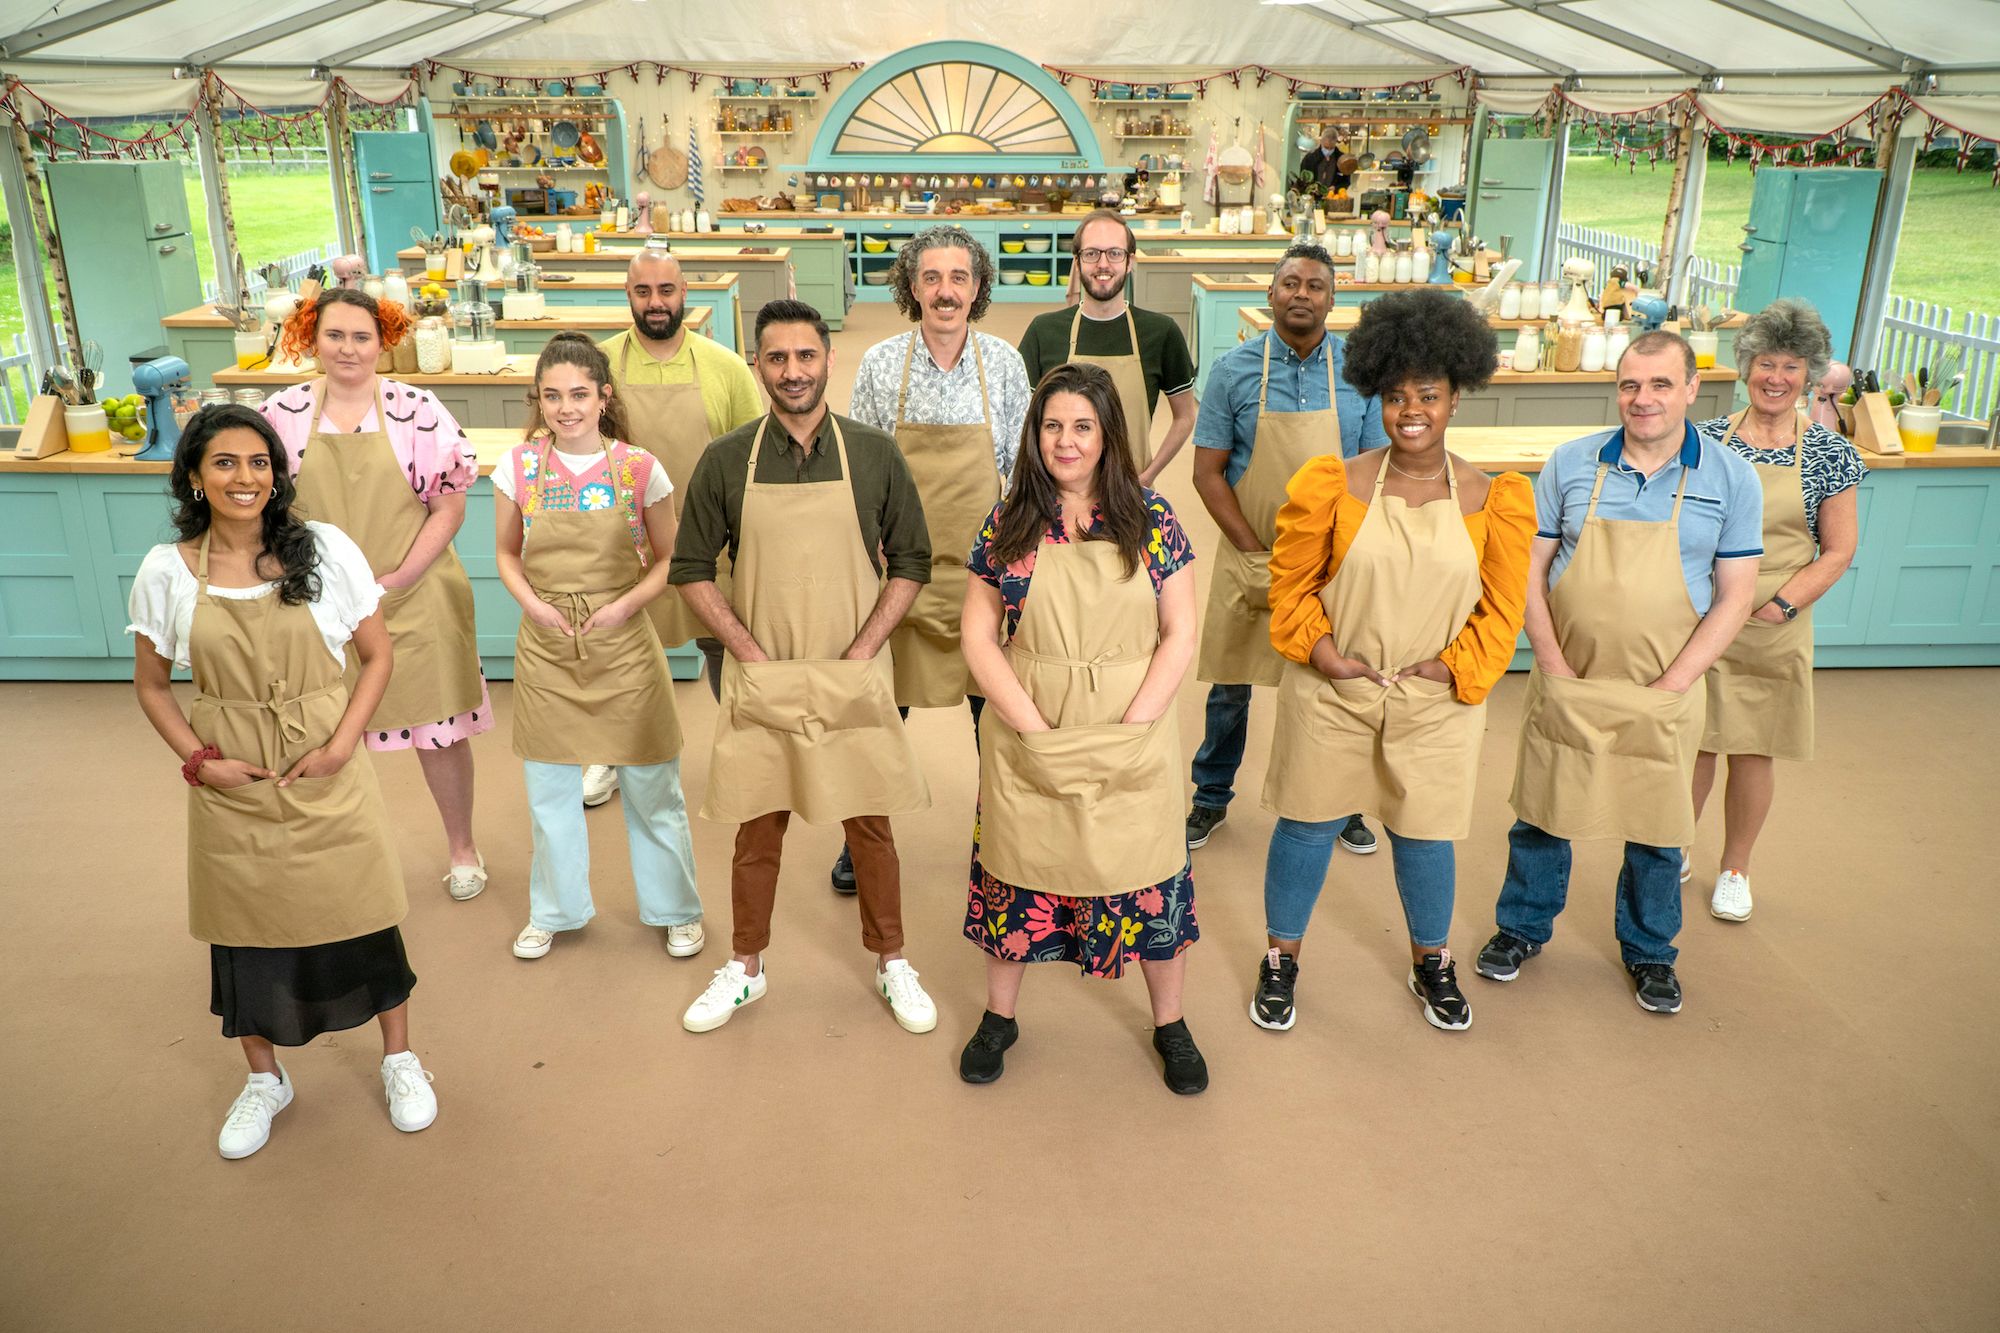 Meet the Cast of The Great British Baking Show pic